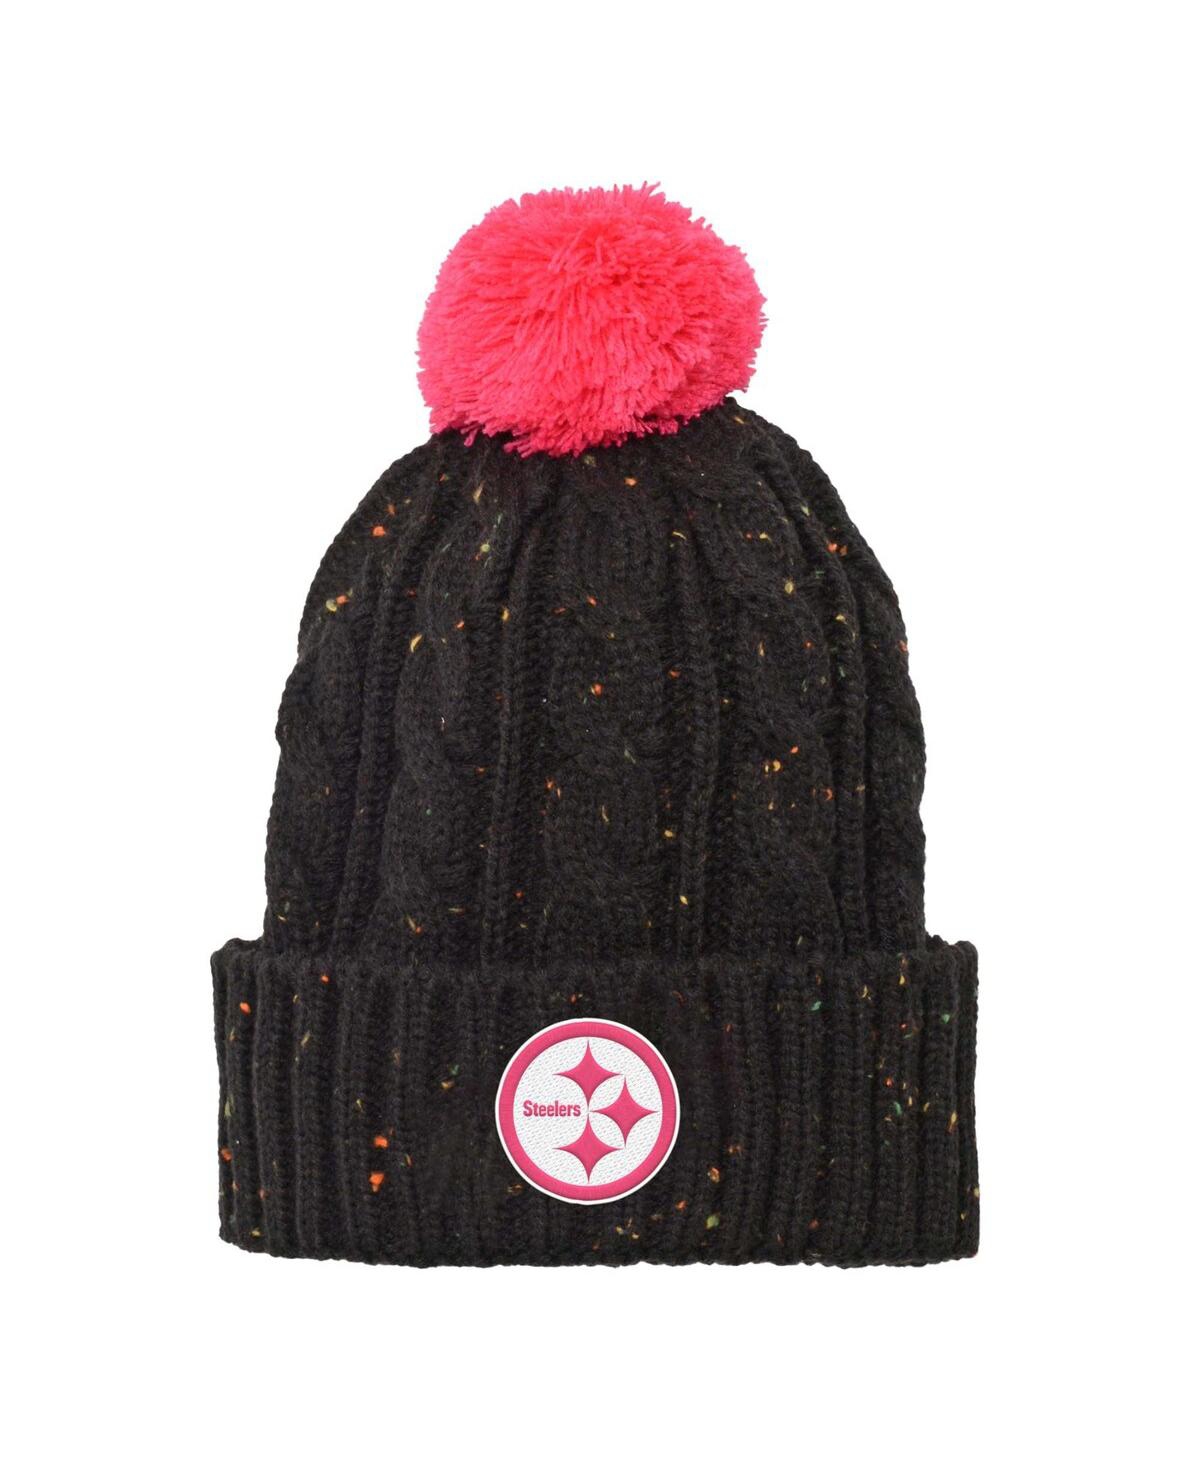 Outerstuff Kids' Youth Boys And Girls Black Pittsburgh Steelers Nep Yarn Cuffed Knit Hat With Pom